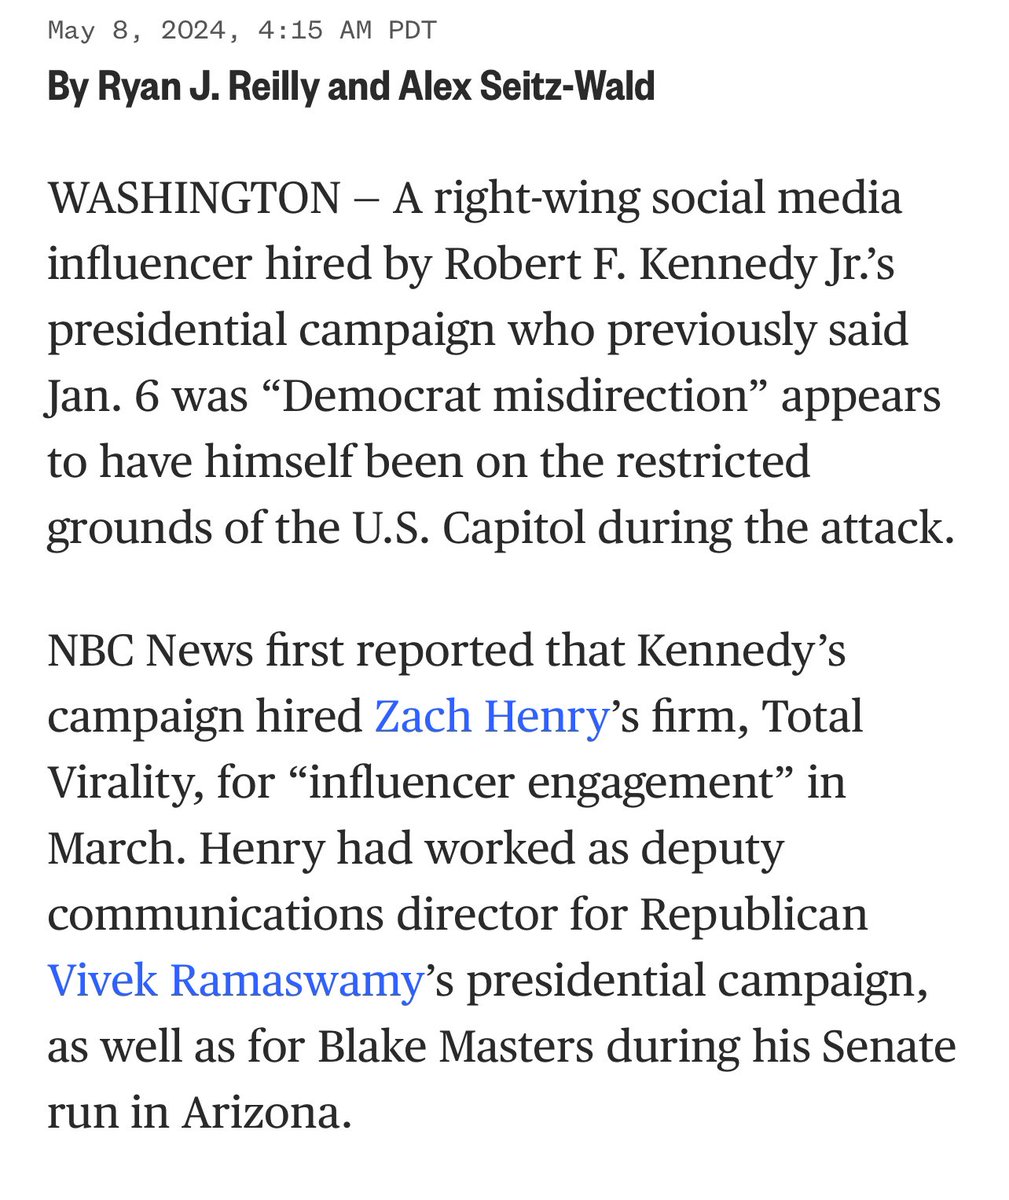 Good god! Does the RFK Jr campaign vet their staff before hiring or is this by design?! 🚨RFK Jr.'s new hire who downplayed Jan. 6 appears to have been at the Capitol during the attack.